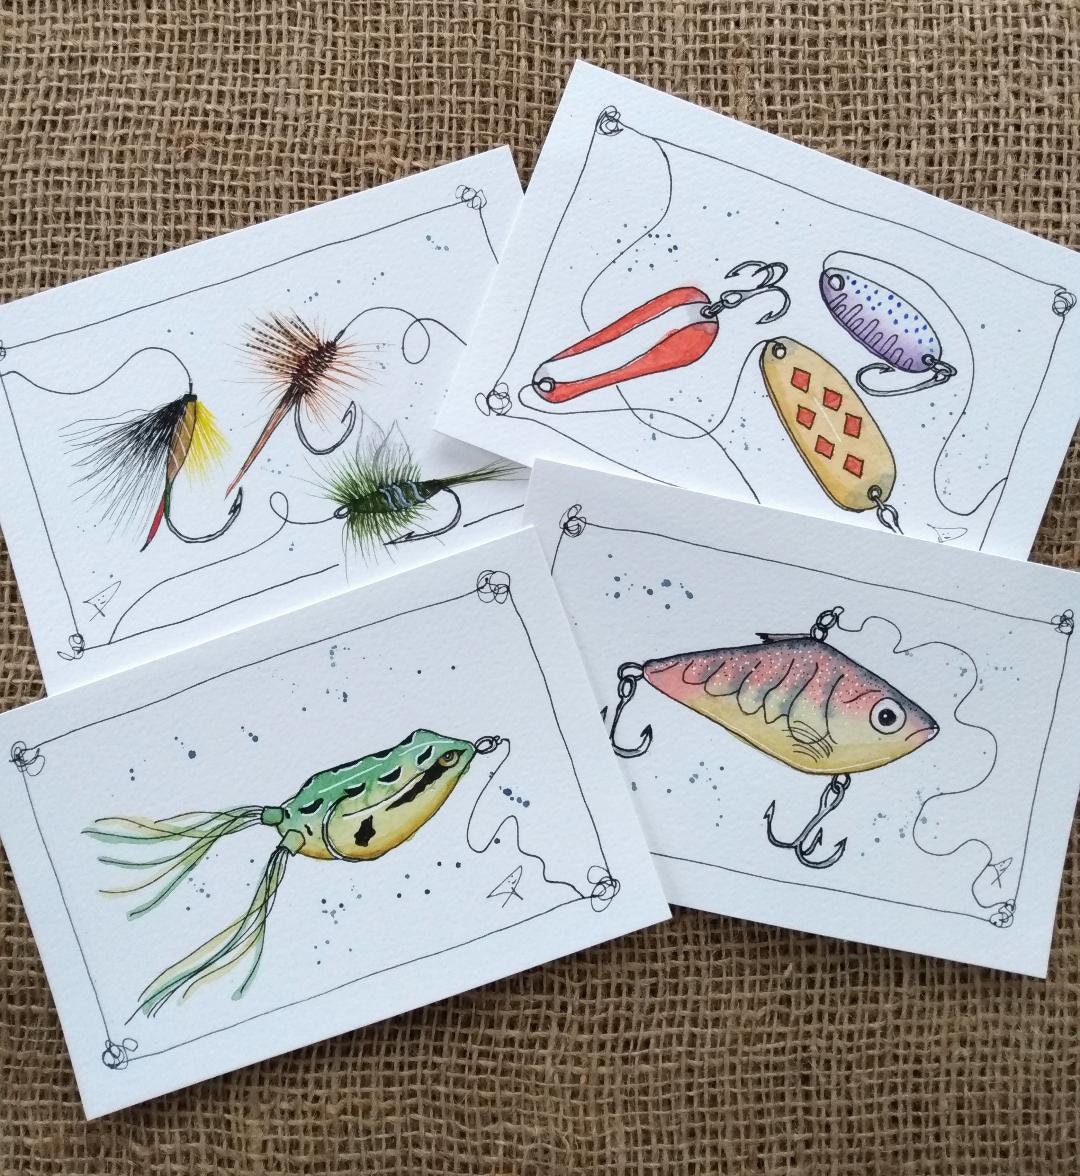 Fly Fishing Lures Artwork Illustrated Art Postcards, Fish Bait Art,  Greeting Cards, Gift for Fisherman, Outdoors Naturalist, Fly Fishing 